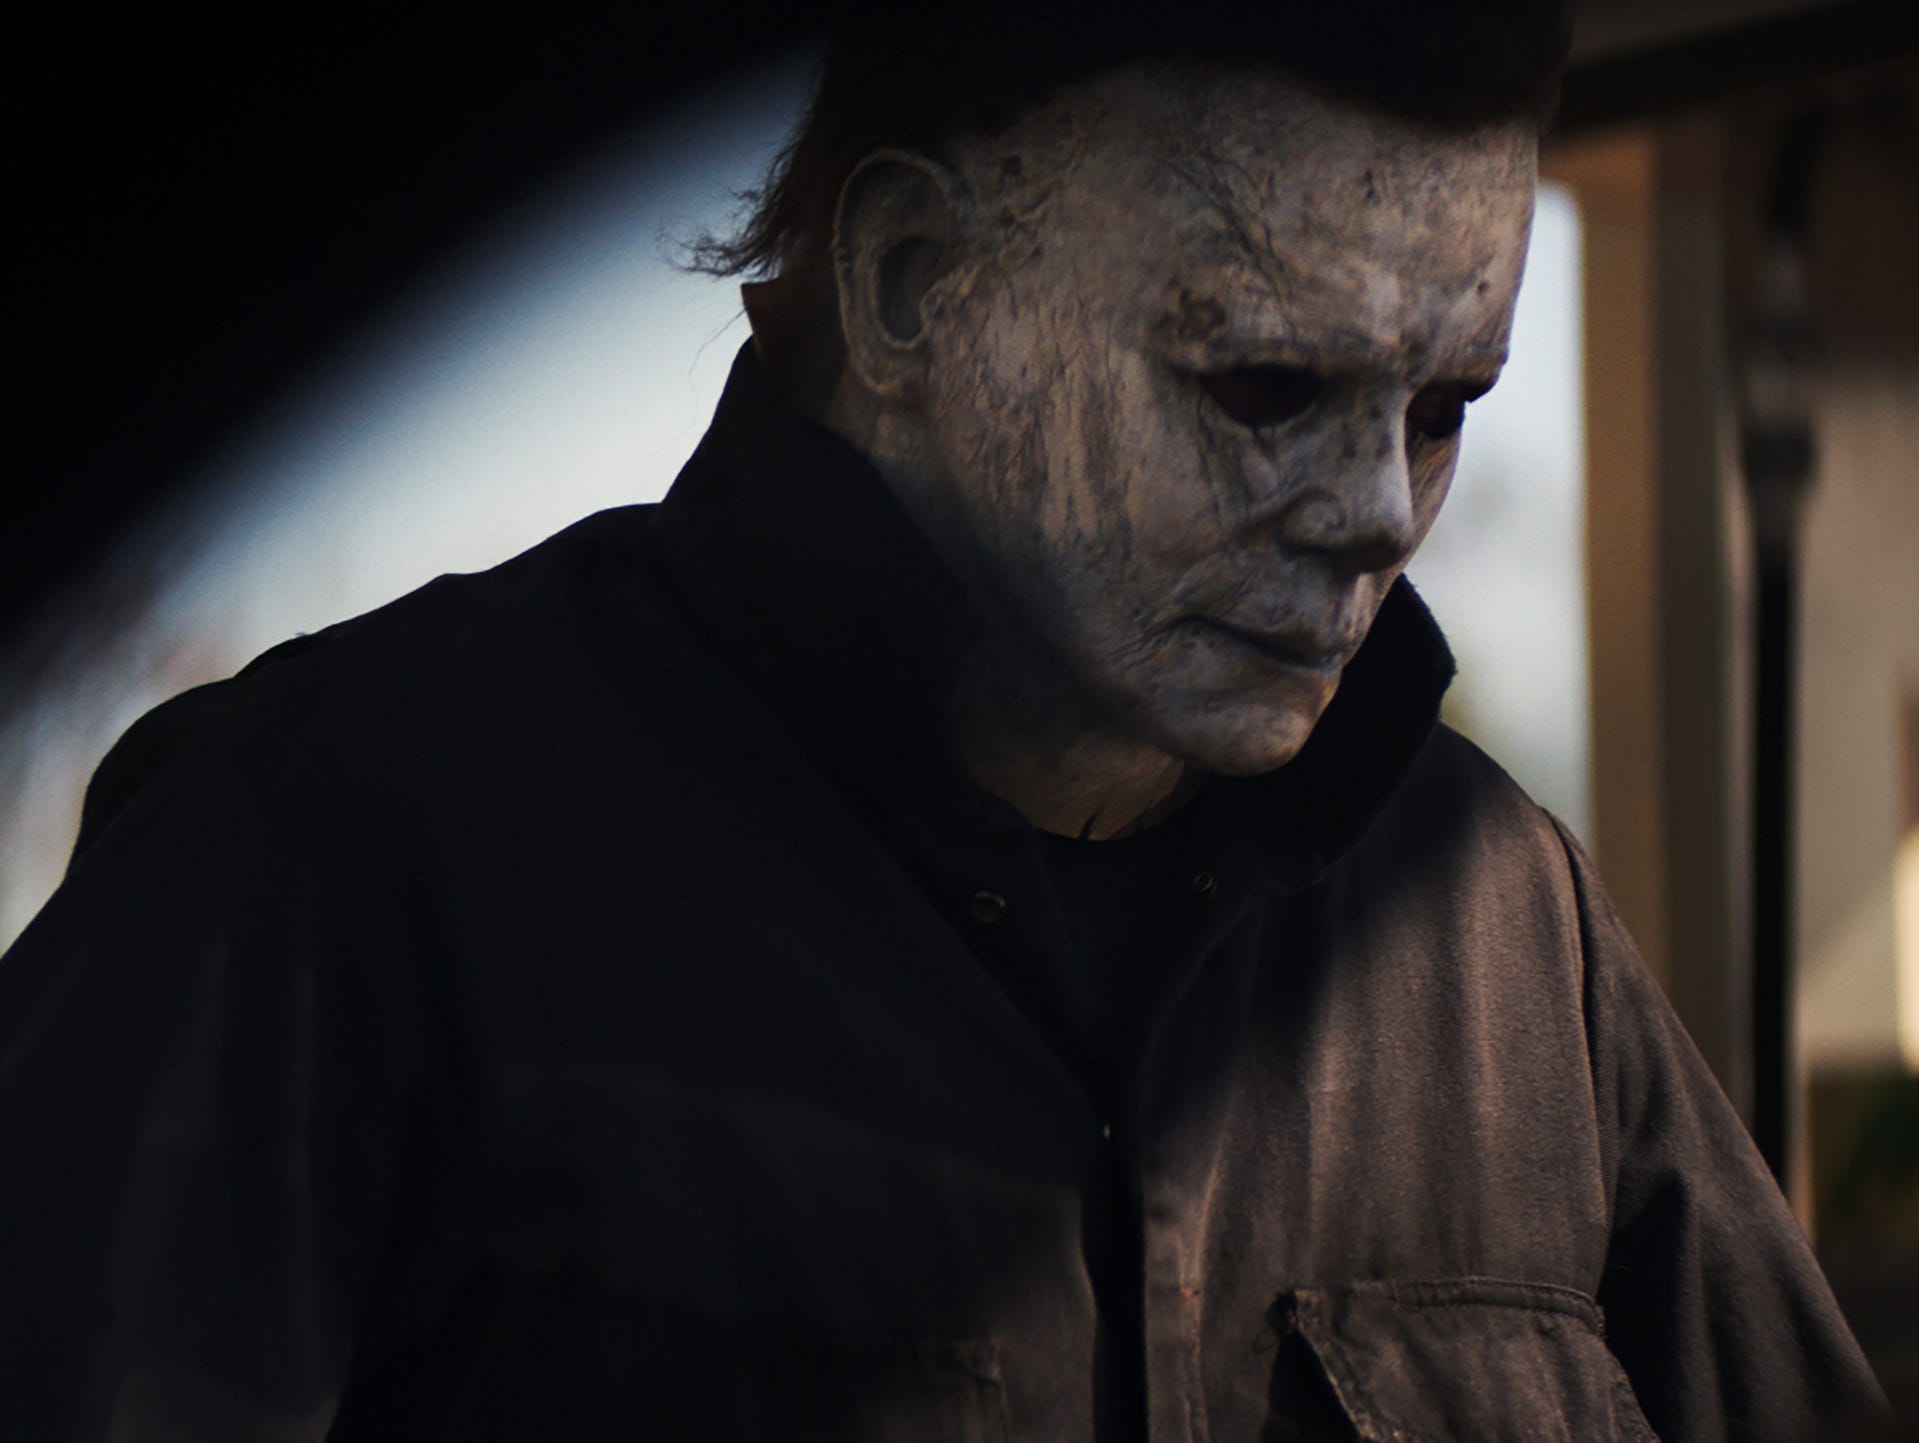 A new "Halloween" mask is part of Michael Myers' evolution